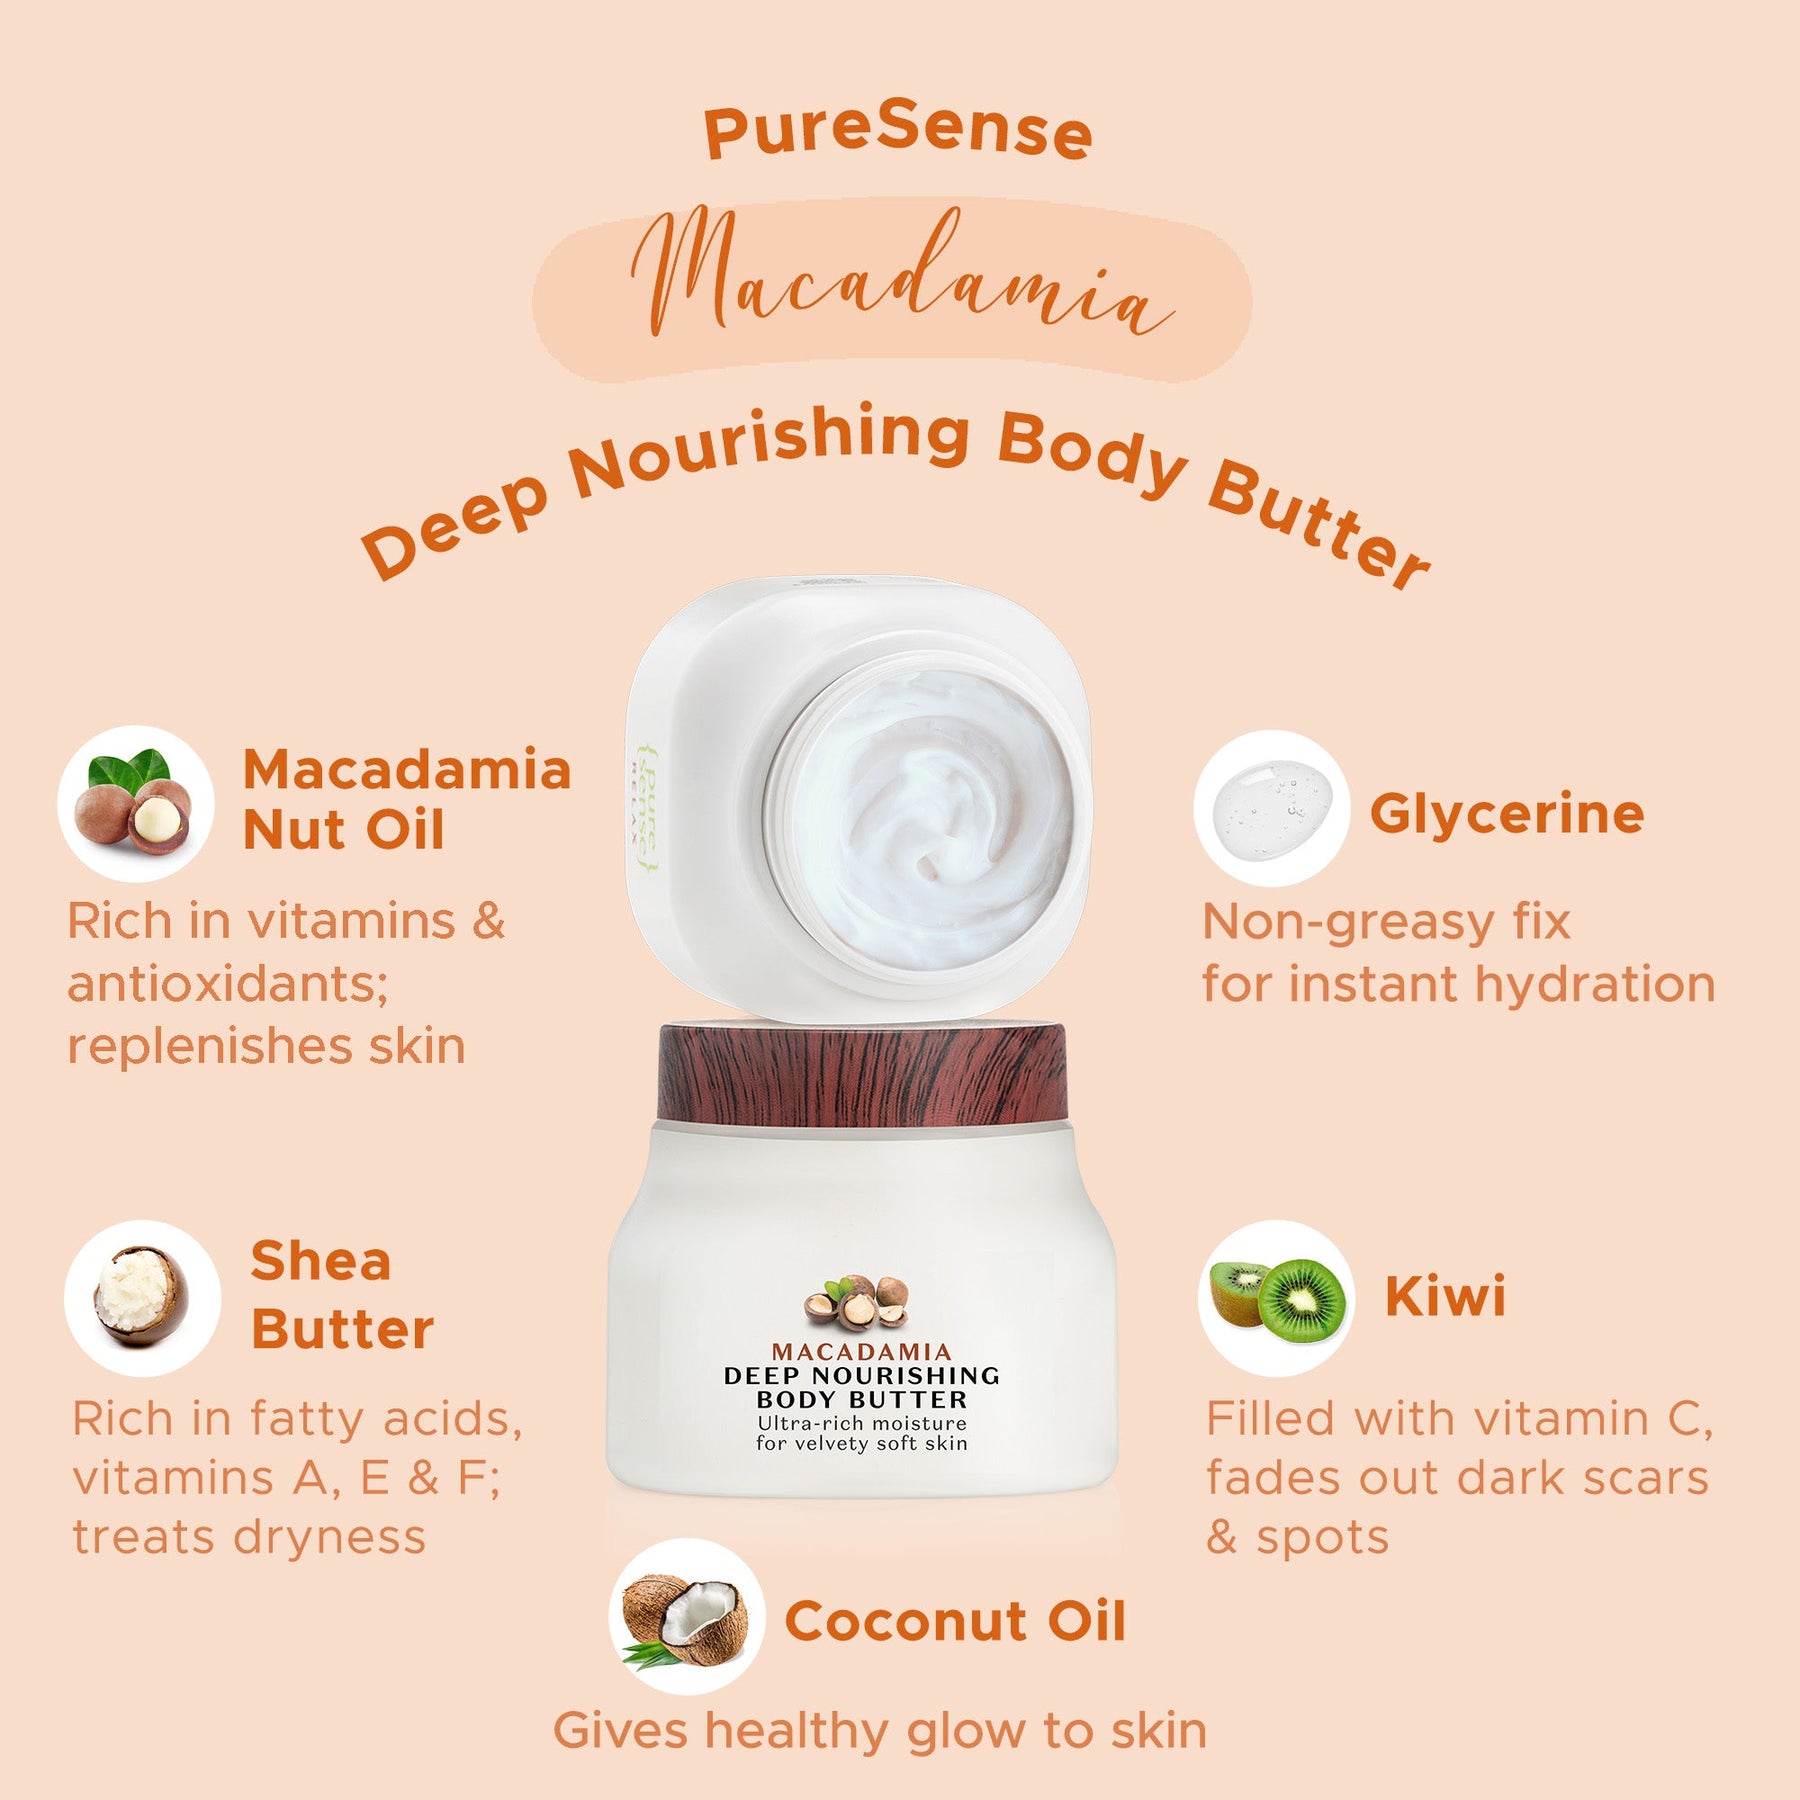 [CRED] Macadamia Deep Nourishing Body Butter | From the makers of Parachute Advansed | 140 ml